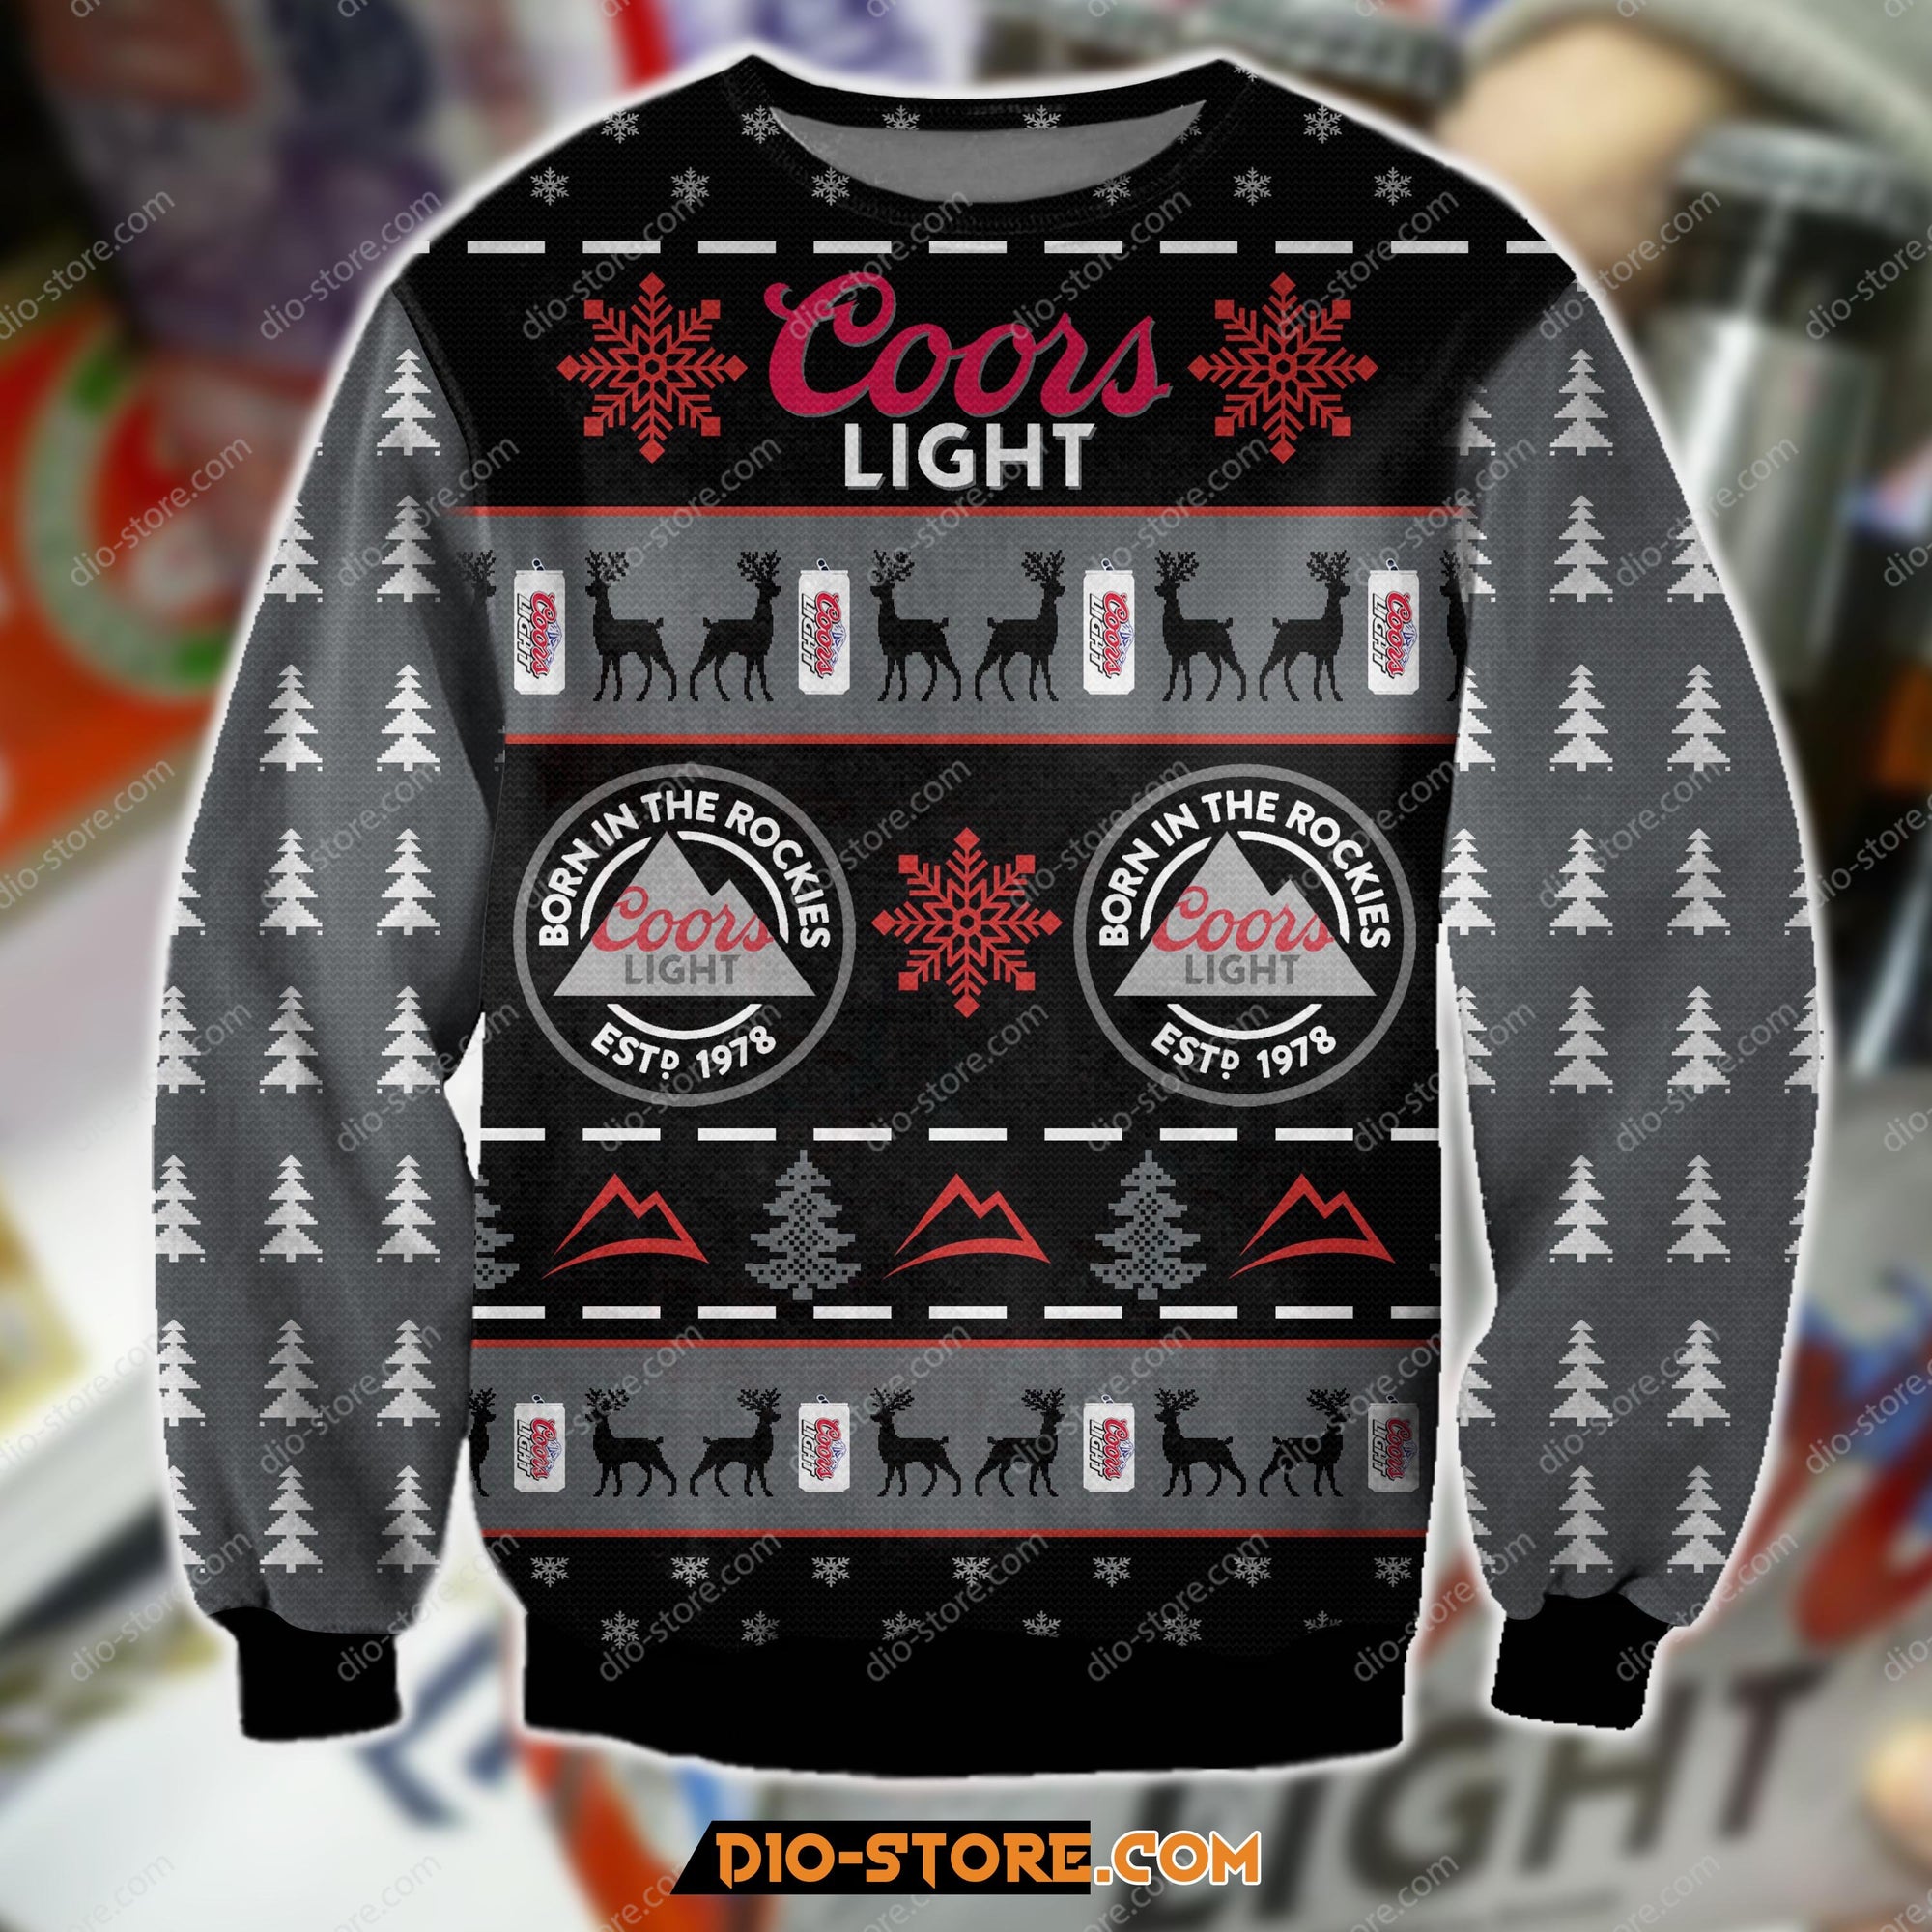 Coors Light Beer Knitting Pattern 3D Print Ugly Christmas Sweater Hoodie All Over Printed Cint10273